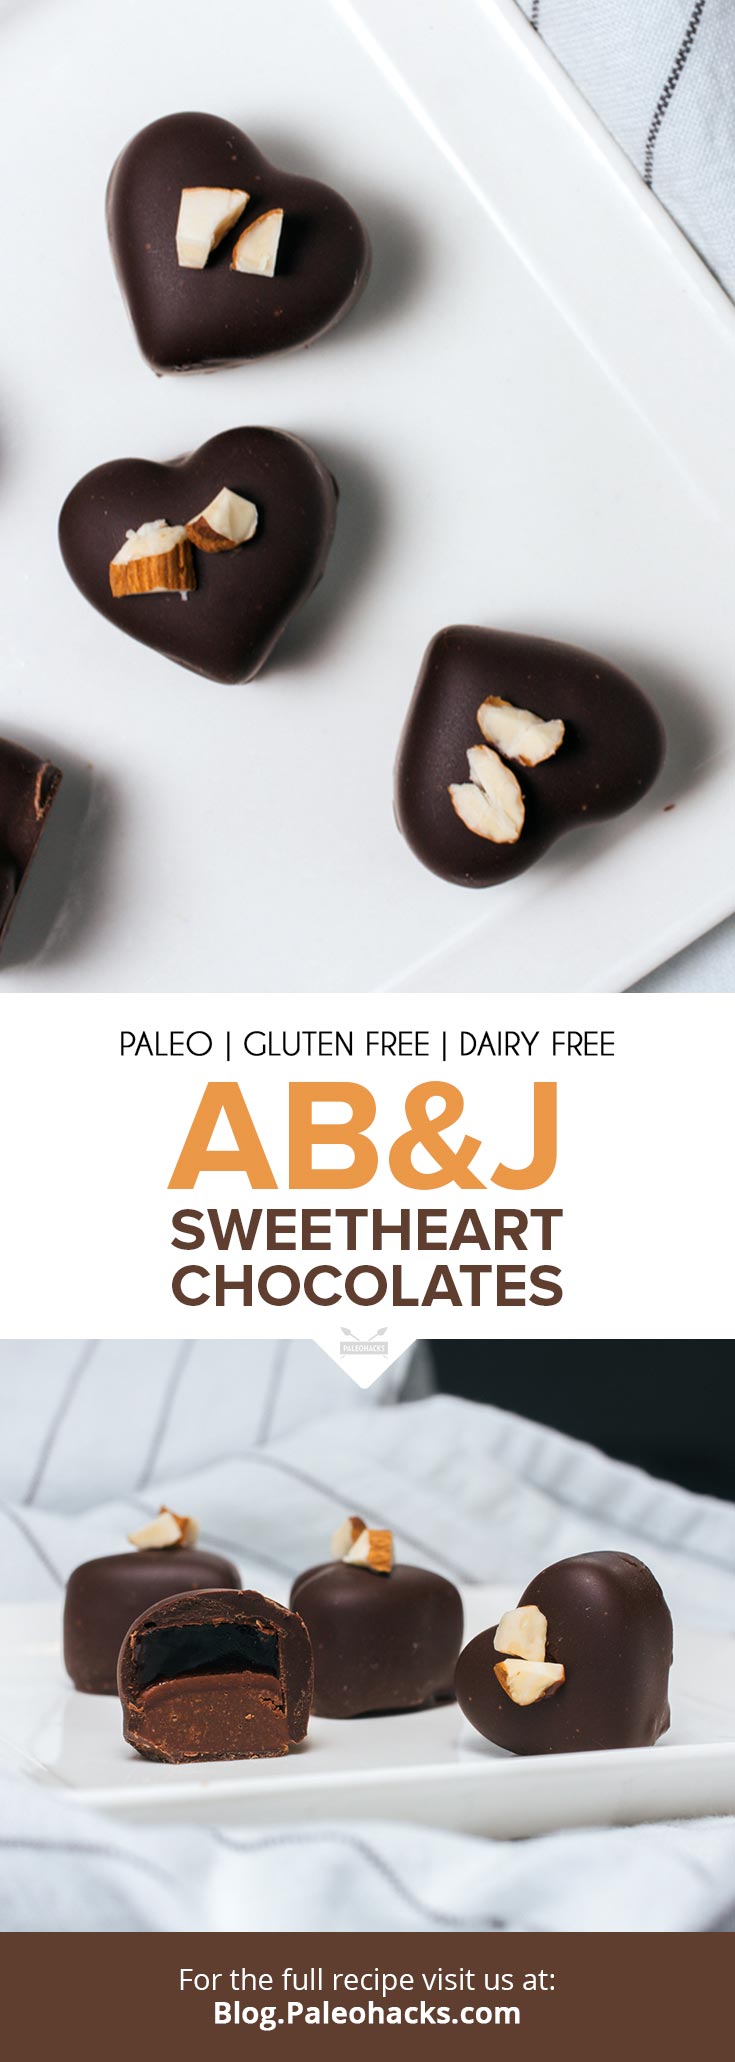 Hello, nostalgia! These almond butter and jelly chocolate treats are the grown-up, Paleo-friendly version of fluffy, creamy, and sweet peanut butter and jelly.